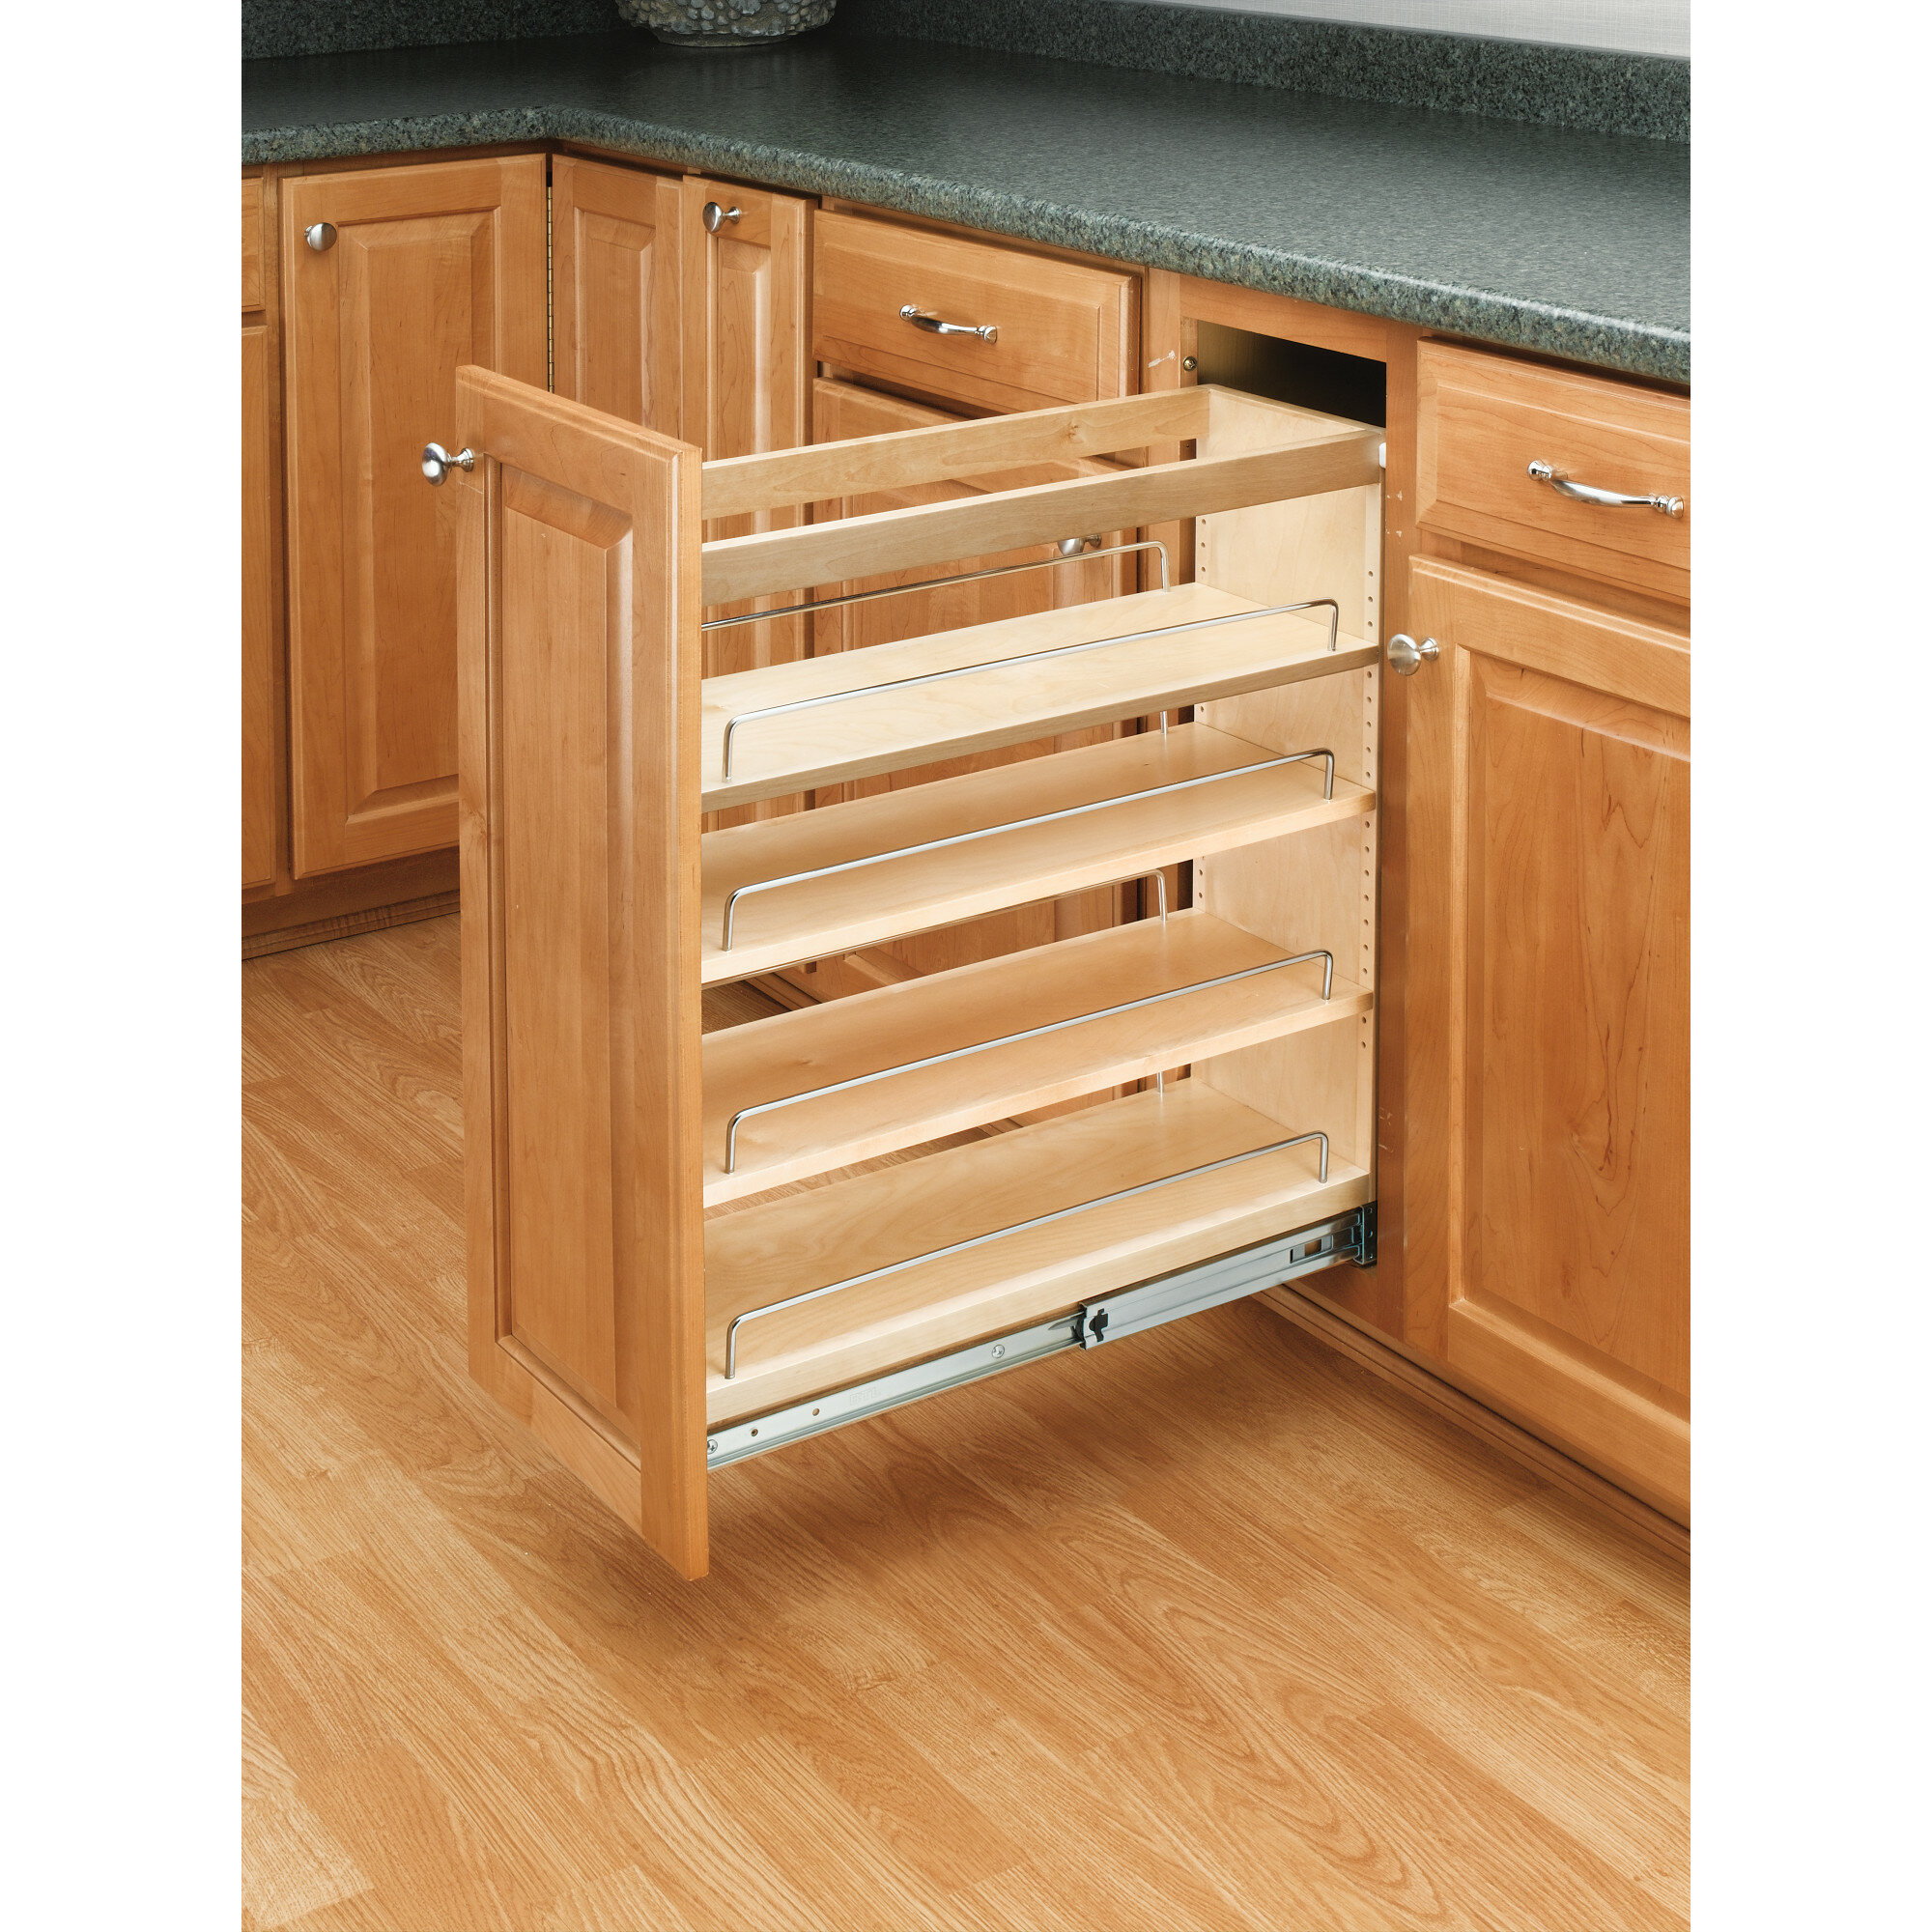 Kitchen Dining Pull Out Organizers Storage Organization Pull